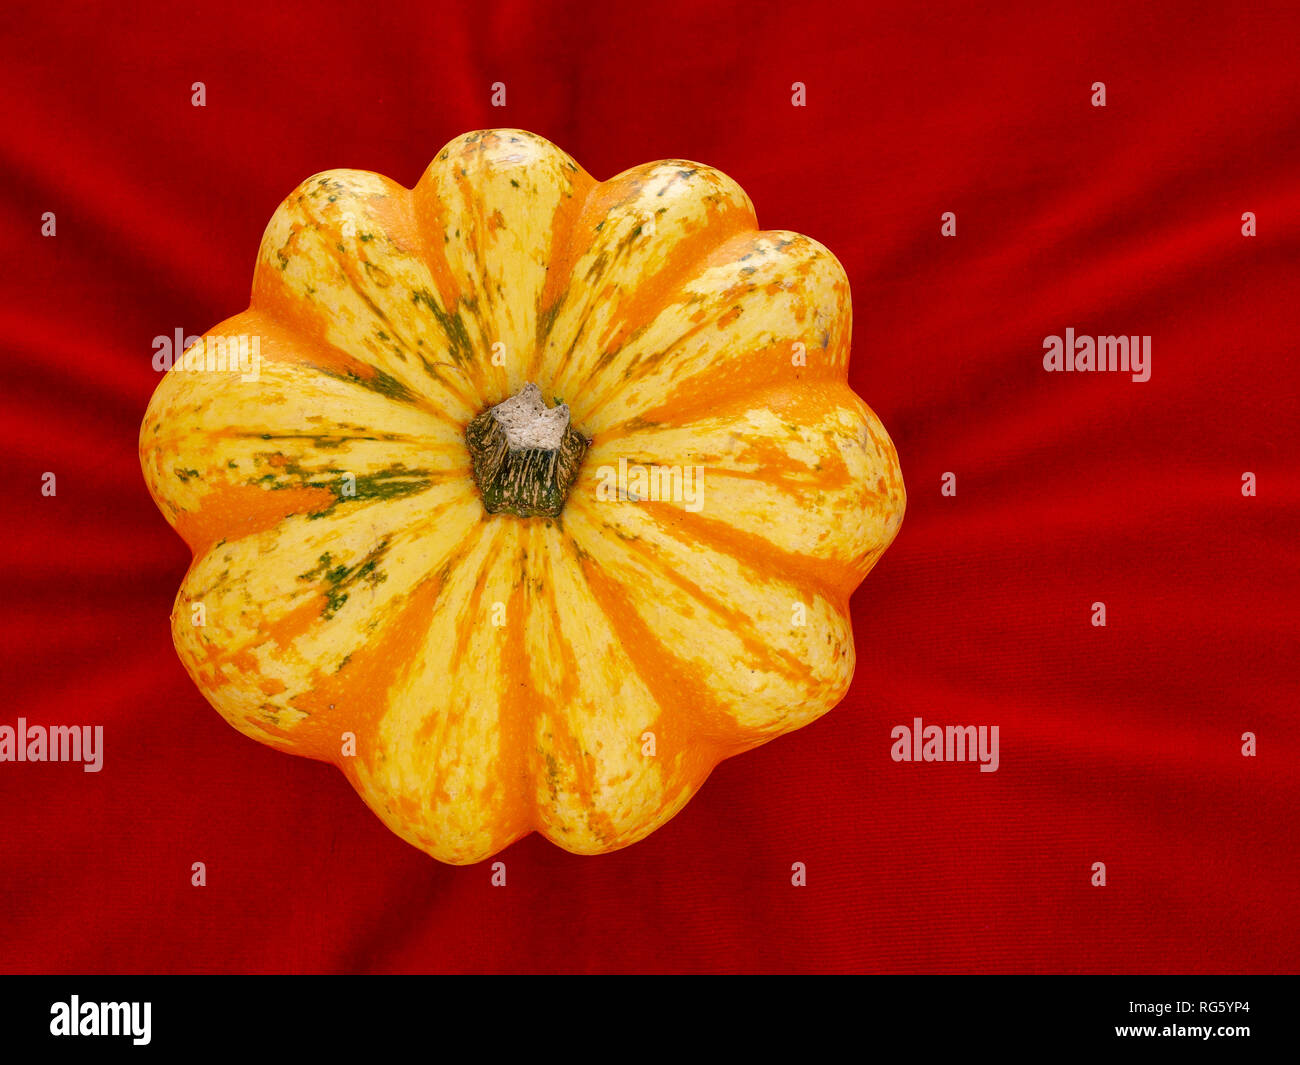 Ornamental squash, pumpkin on red velvet cushion background, natural radiating lines for background. Stock Photo